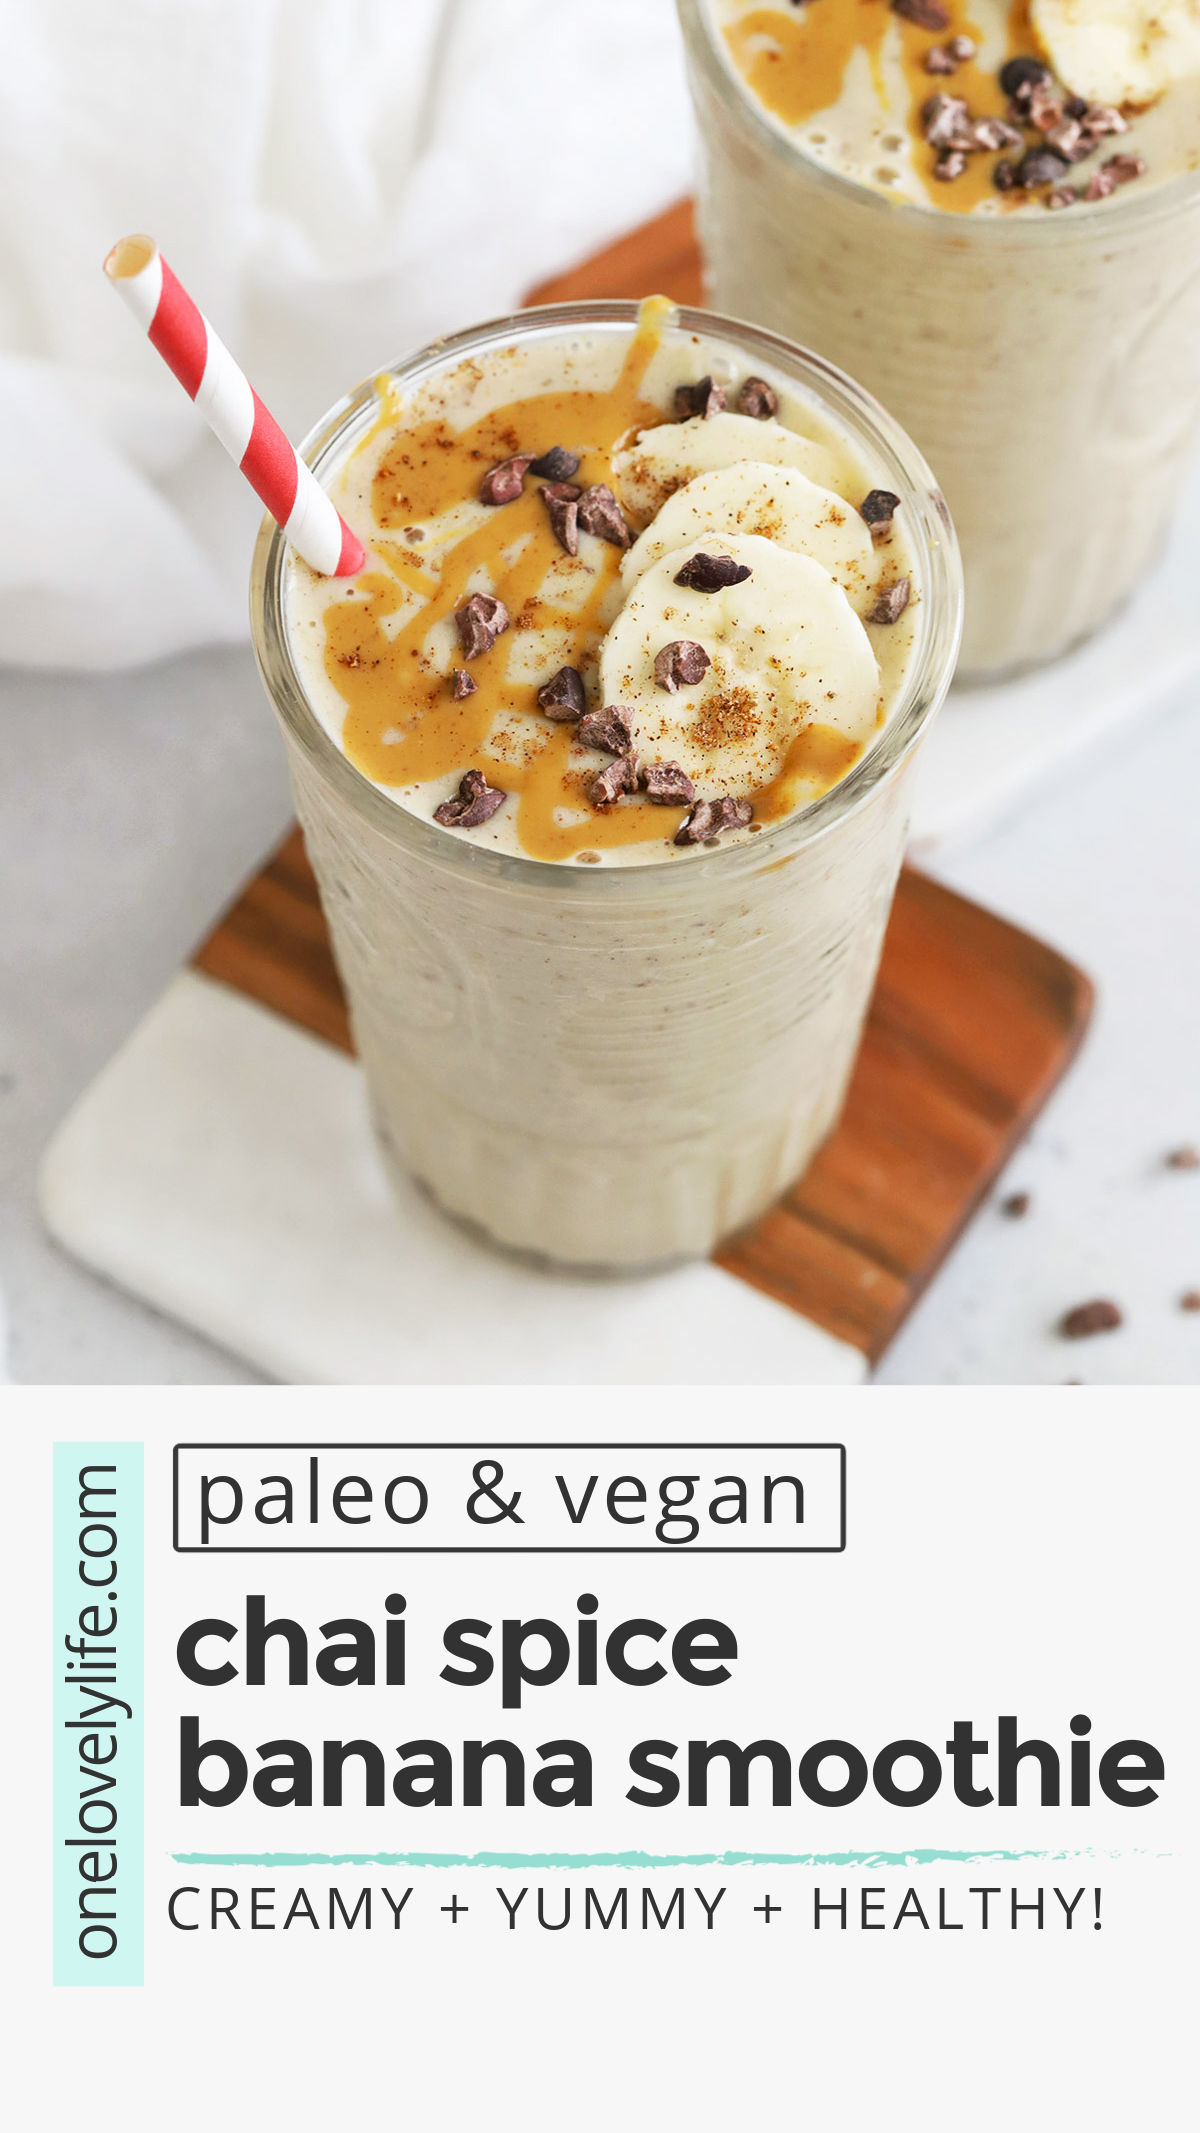 Chai Spiced Banana Smoothies - This chai banana smoothie is such a yummy change of pace! It's perfect all year long. (Paleo, Vegan) // Chai Spice Banana Smoothie // Banana Smoothie Recipe // Banana Chai Smoothie // Fall Smoothie // Winter Smoothie // Paleo Smoothie // Vegan Smoothie